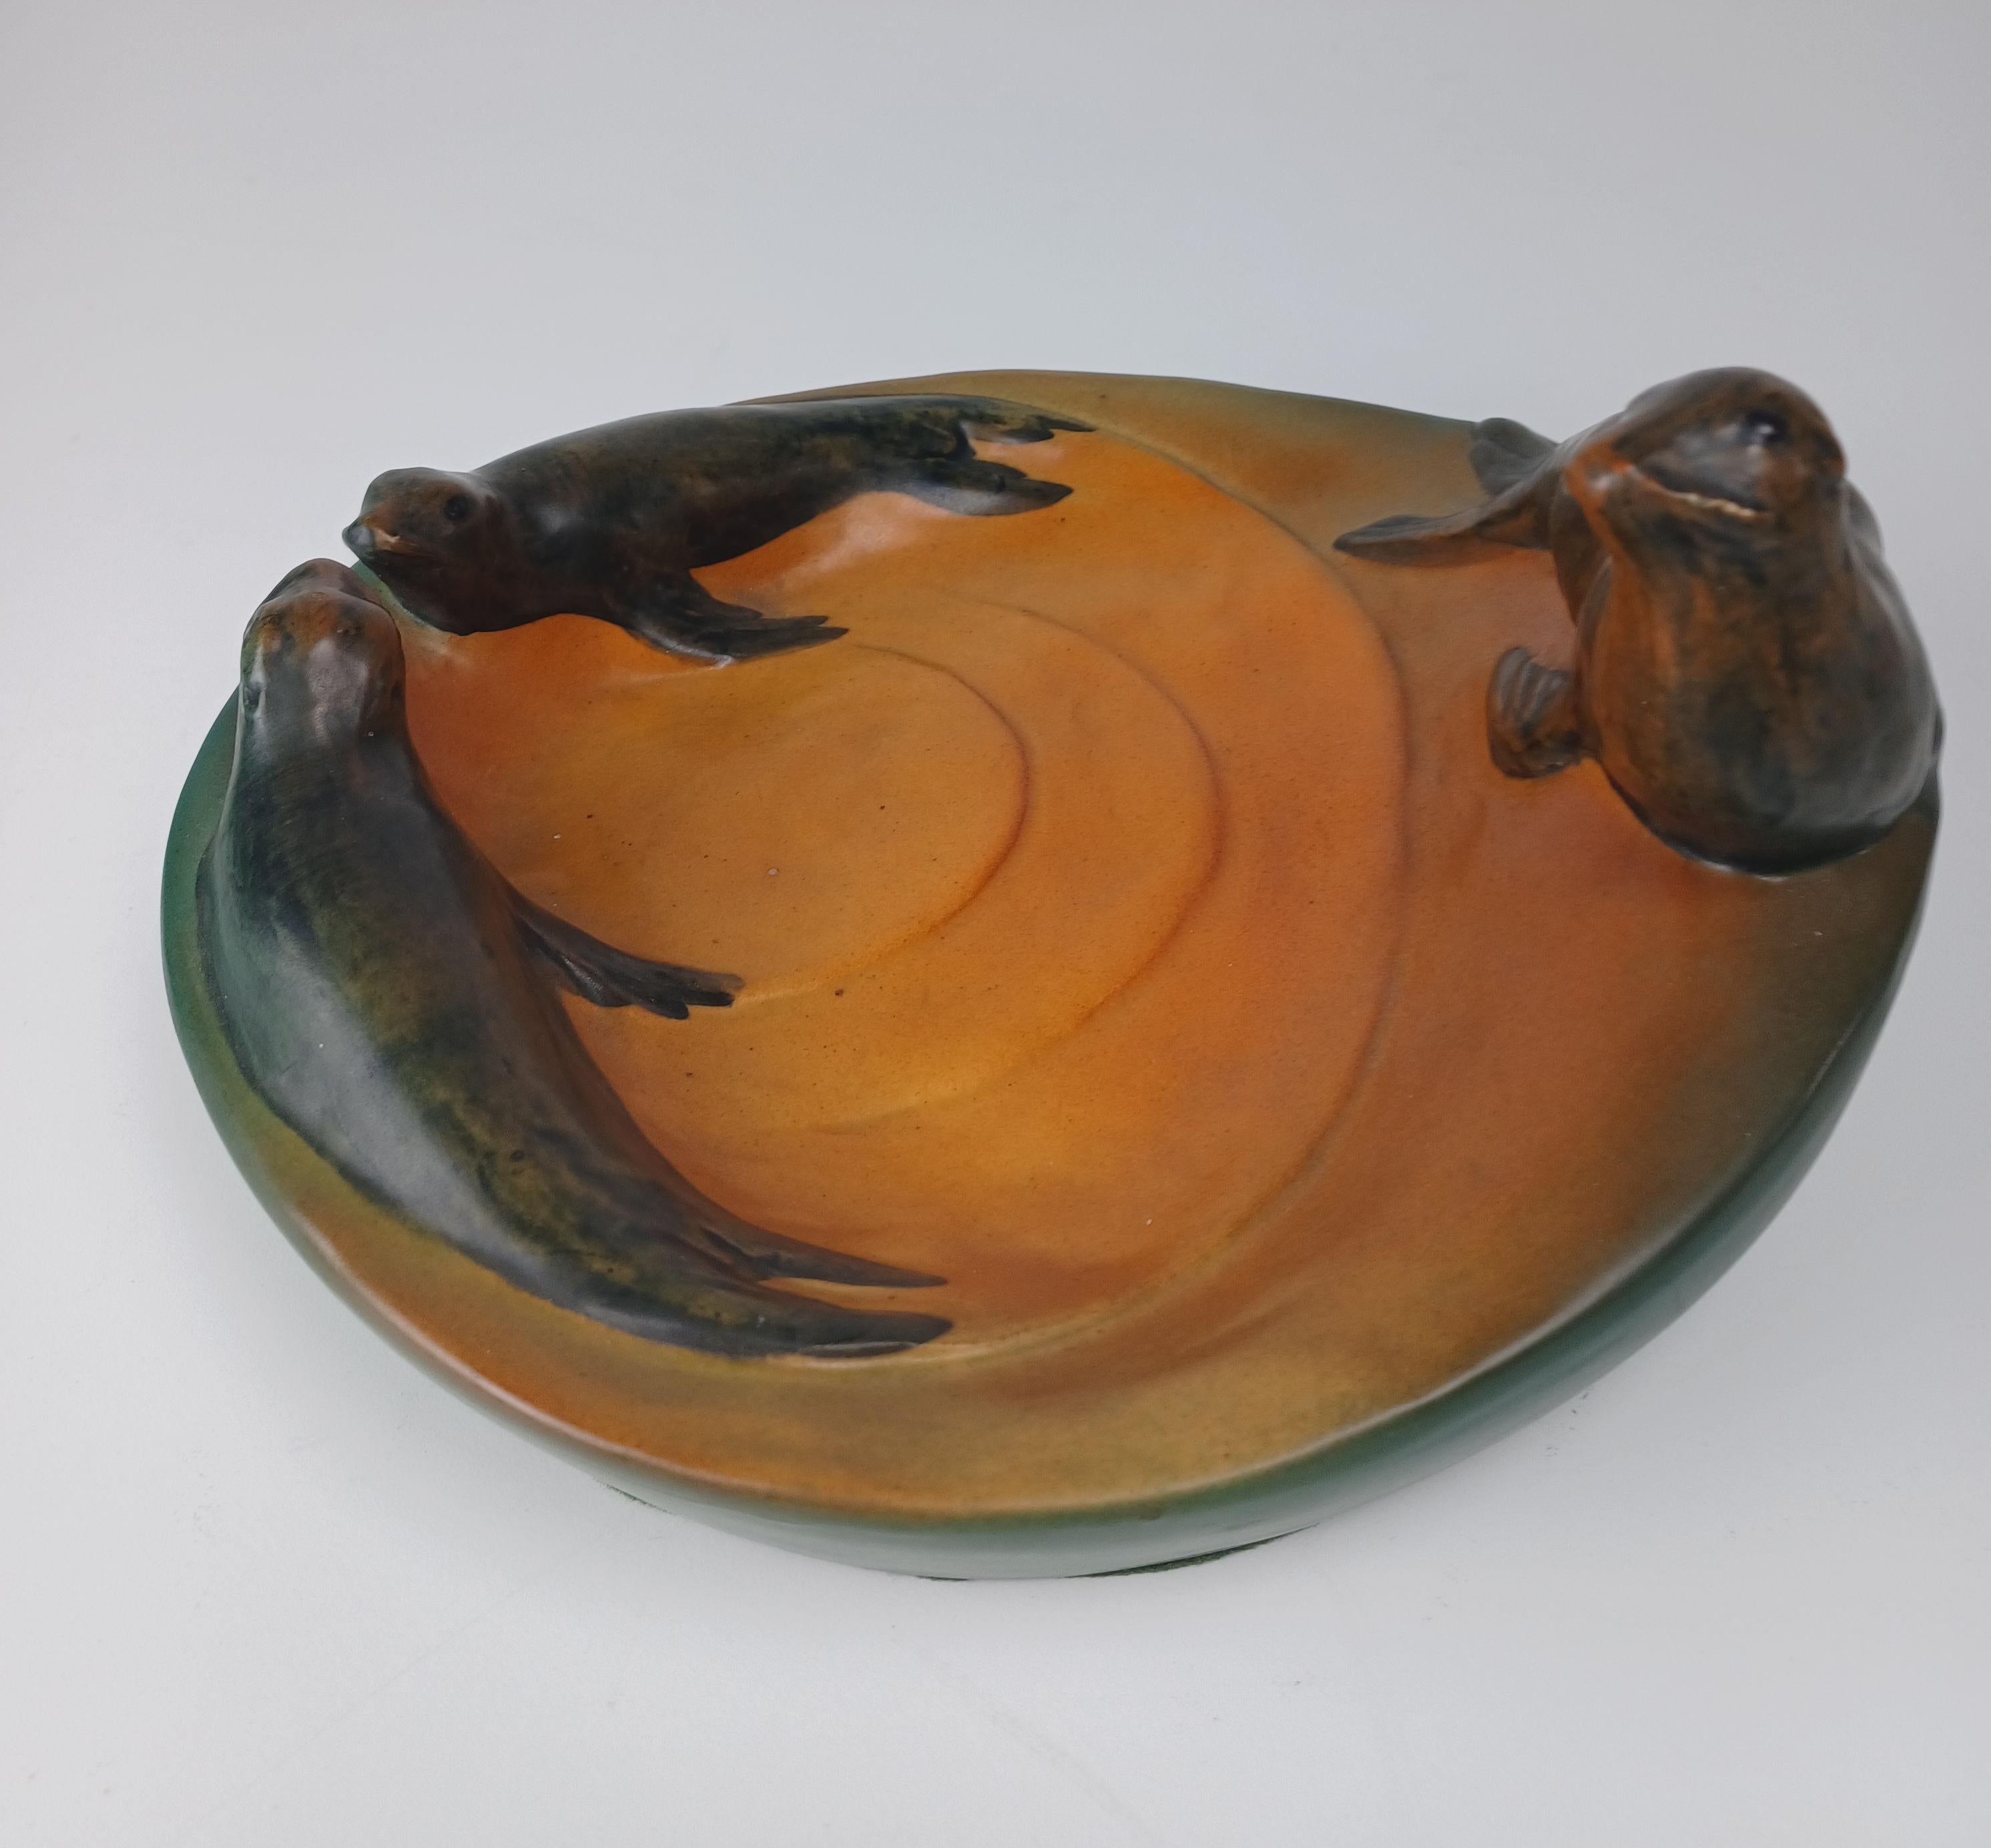 Early 20th Century 1910's Danish Art Nouveau Handcrafted Sealion Bowl - Ash Tray by P. Ipsens Enke For Sale